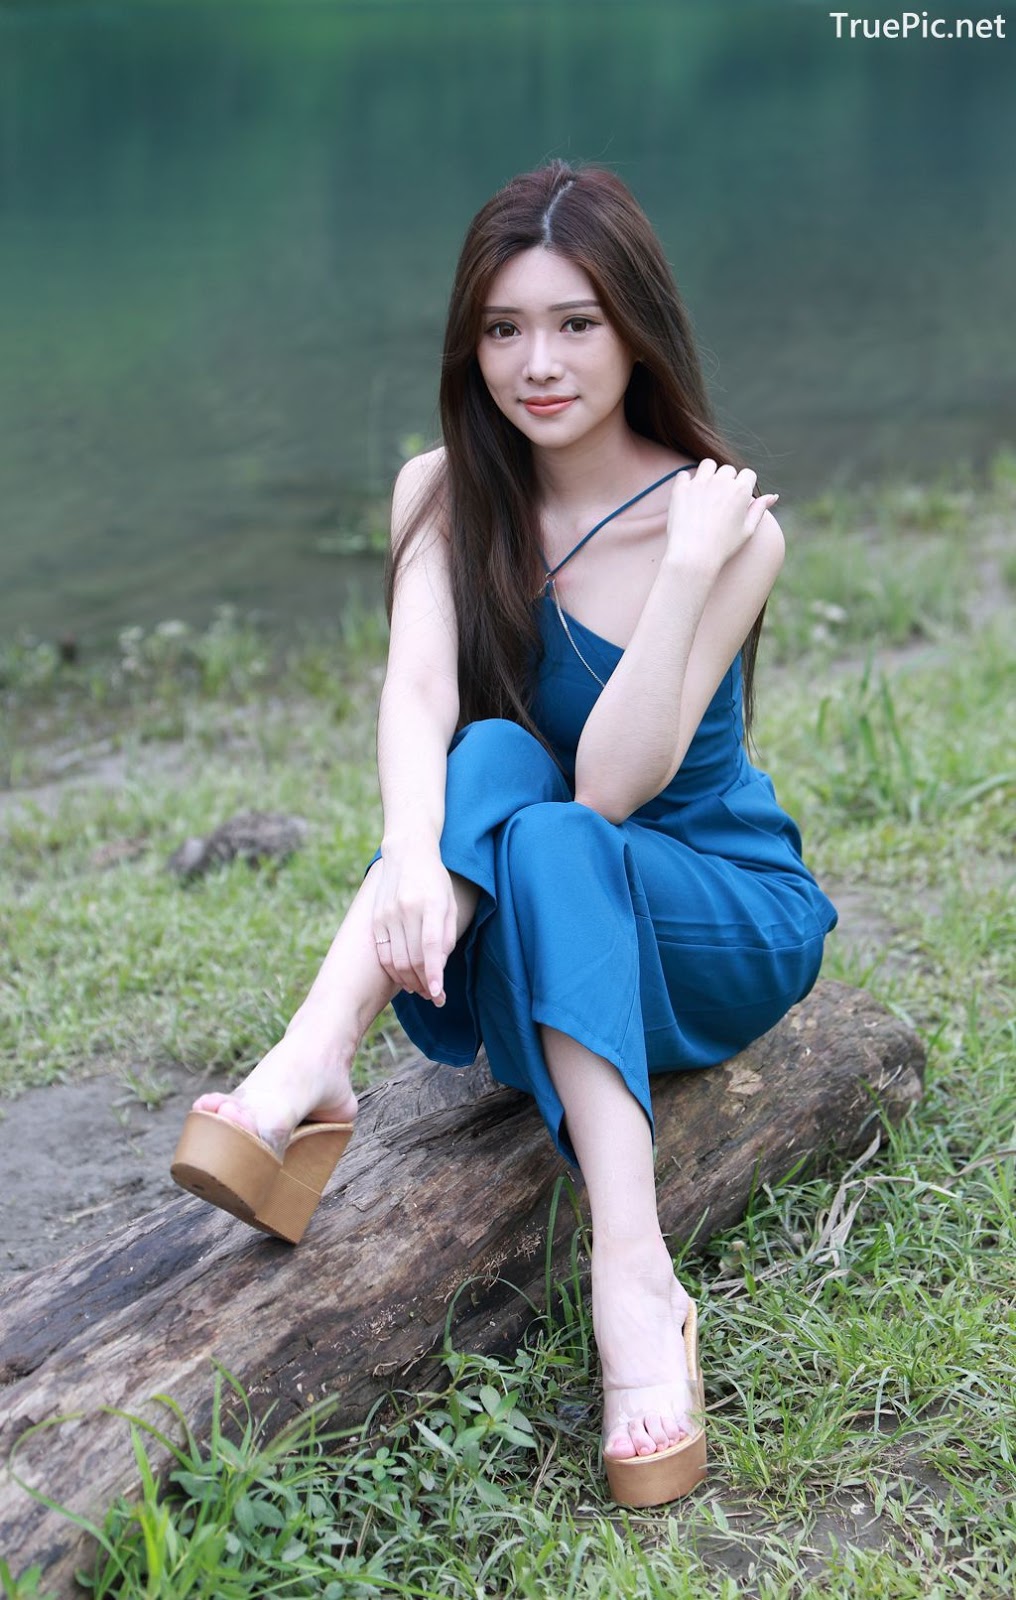 Image-Taiwanese-Pure-Girl-承容-Young-Beautiful-And-Lovely-TruePic.net- Picture-97